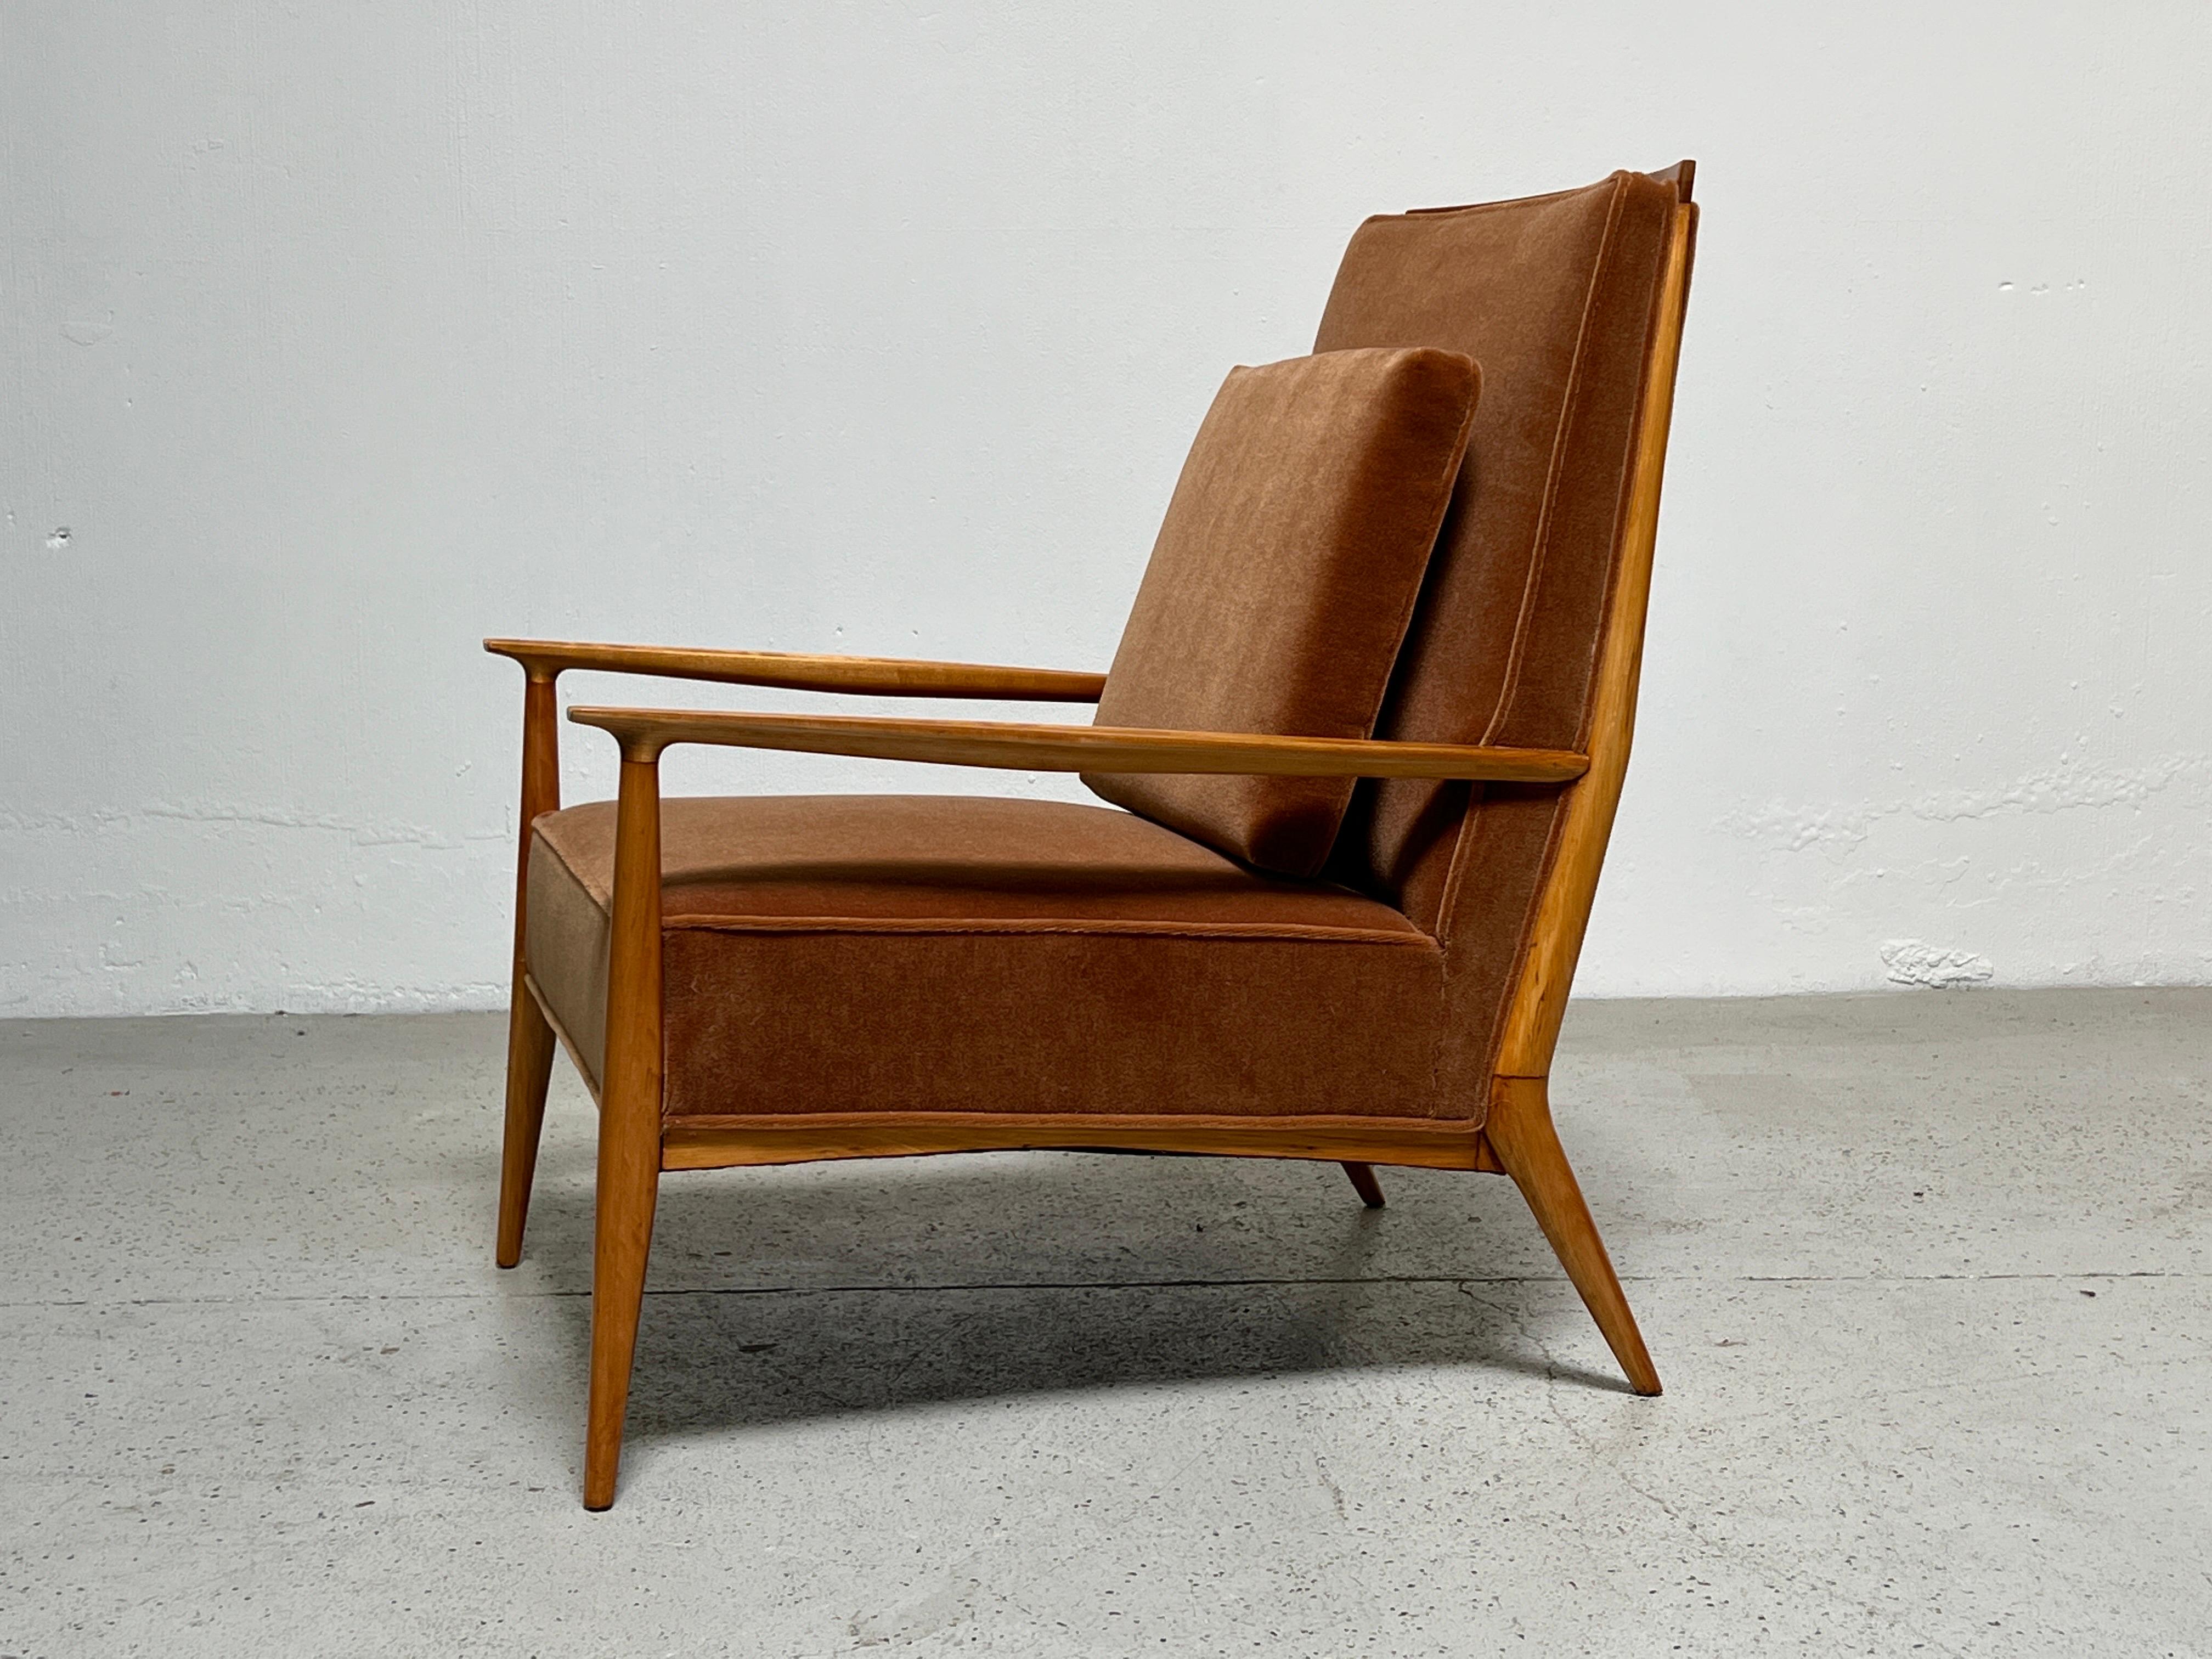 A sculptural high-back lounge chair with maple frame designed by Paul McCobb. Refinished and reupholstered in mohair.